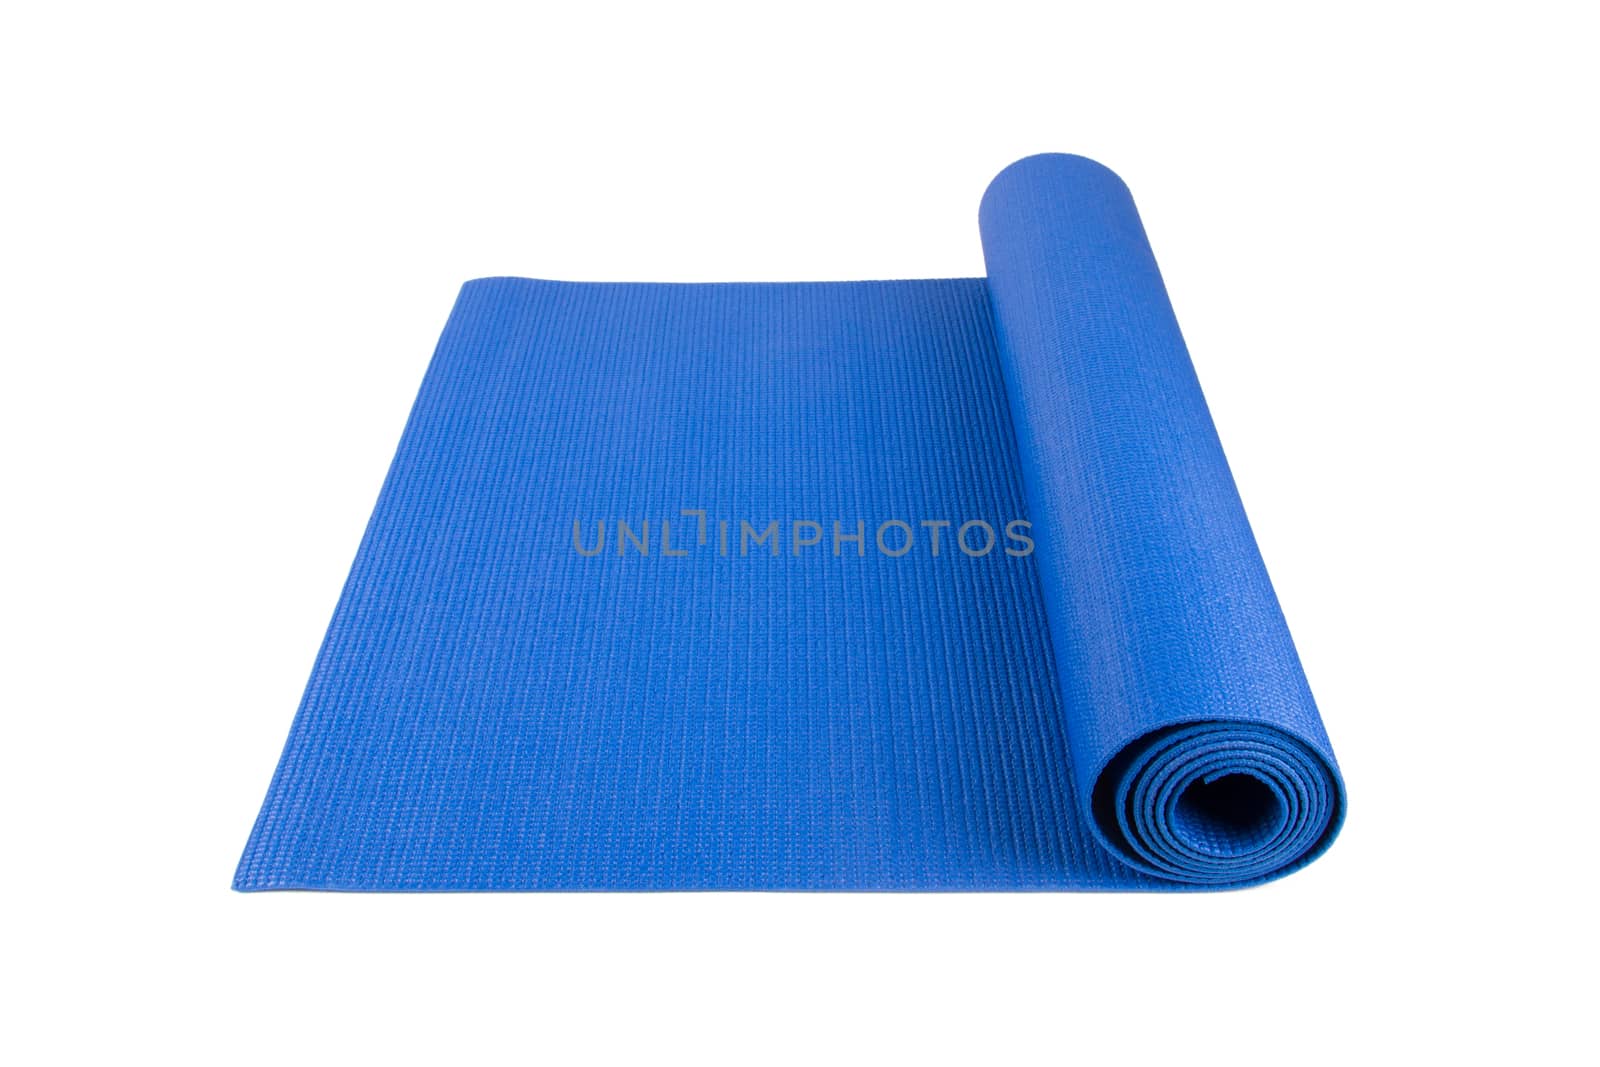 Side view of blue rolled yoga, pilates or fitness mat for exercise, isolated on white background.